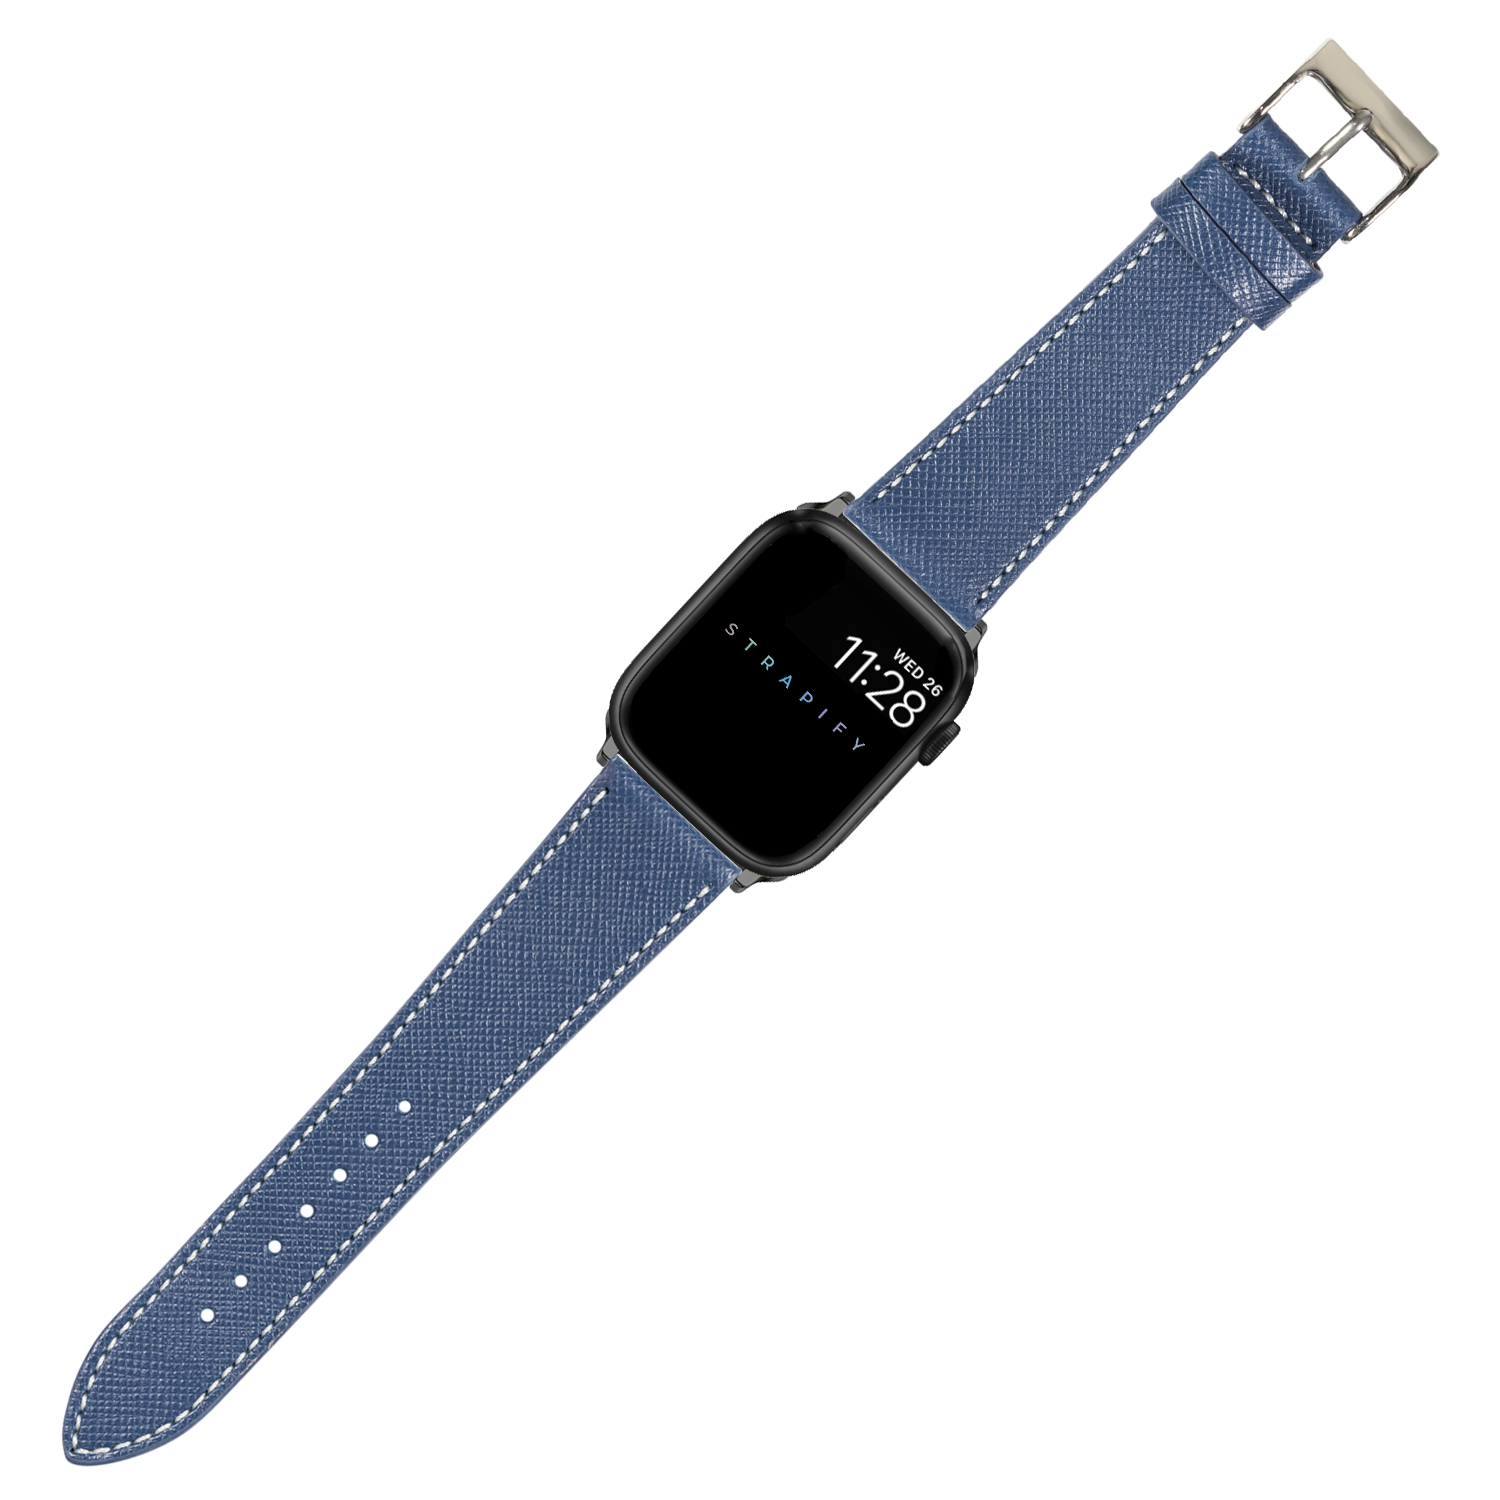 [Apple Watch] Saffiano Leather - Navy Blue with White Stitching